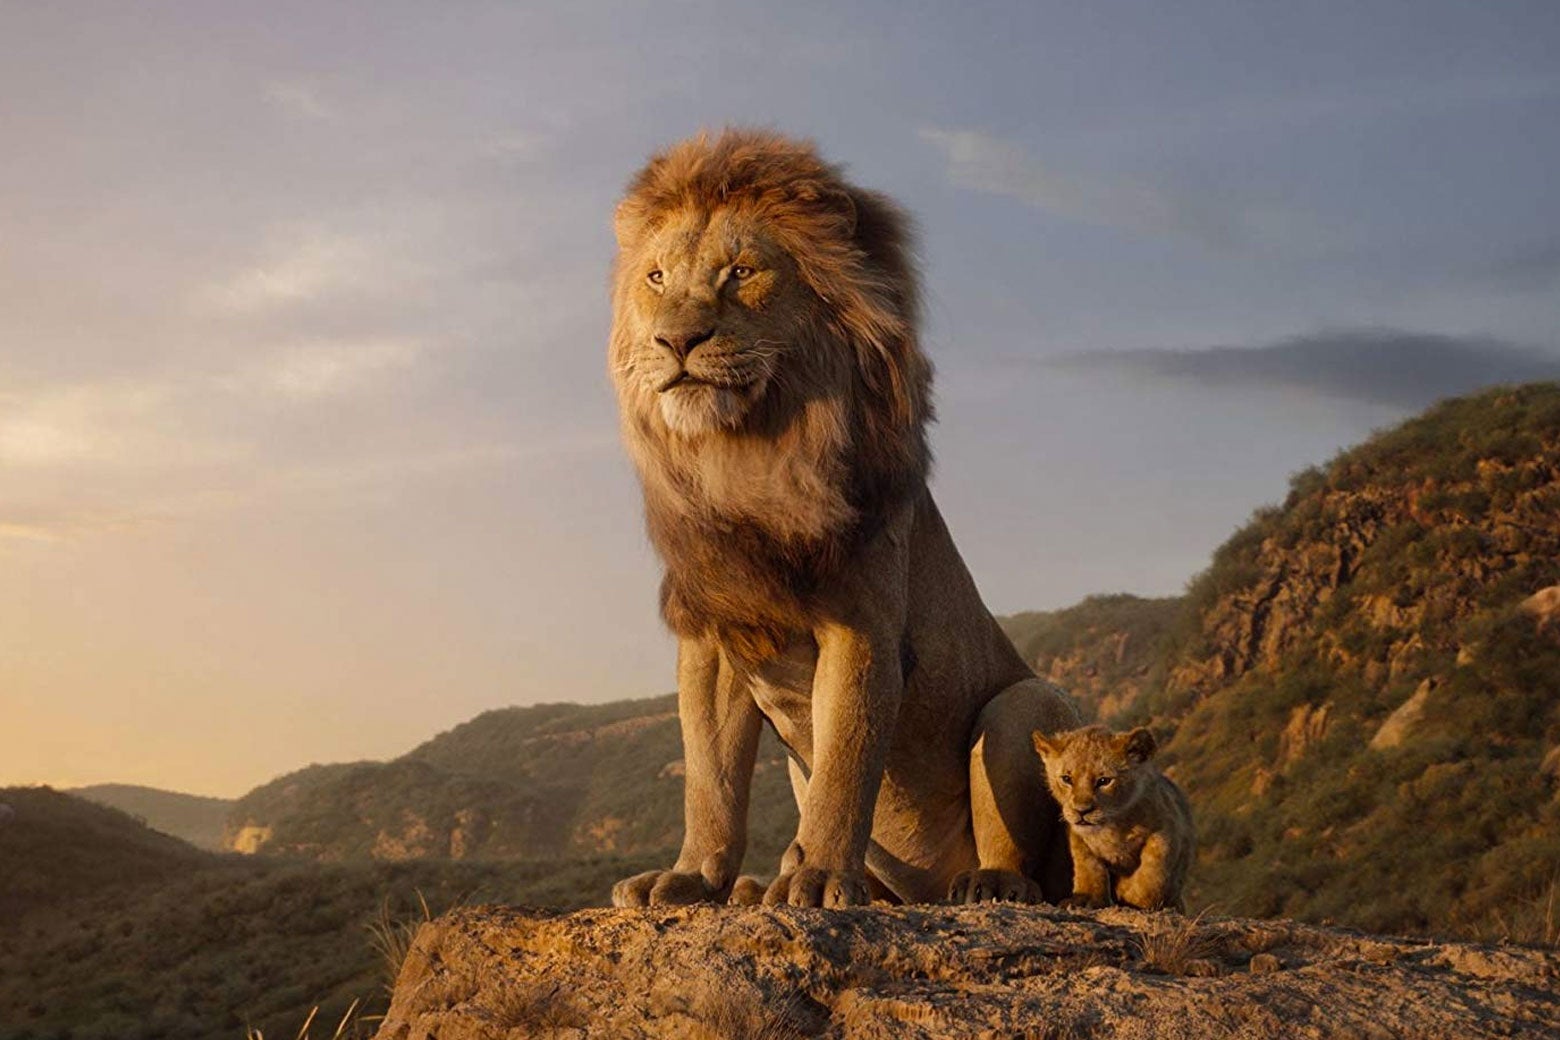 The Lion King (the new one).